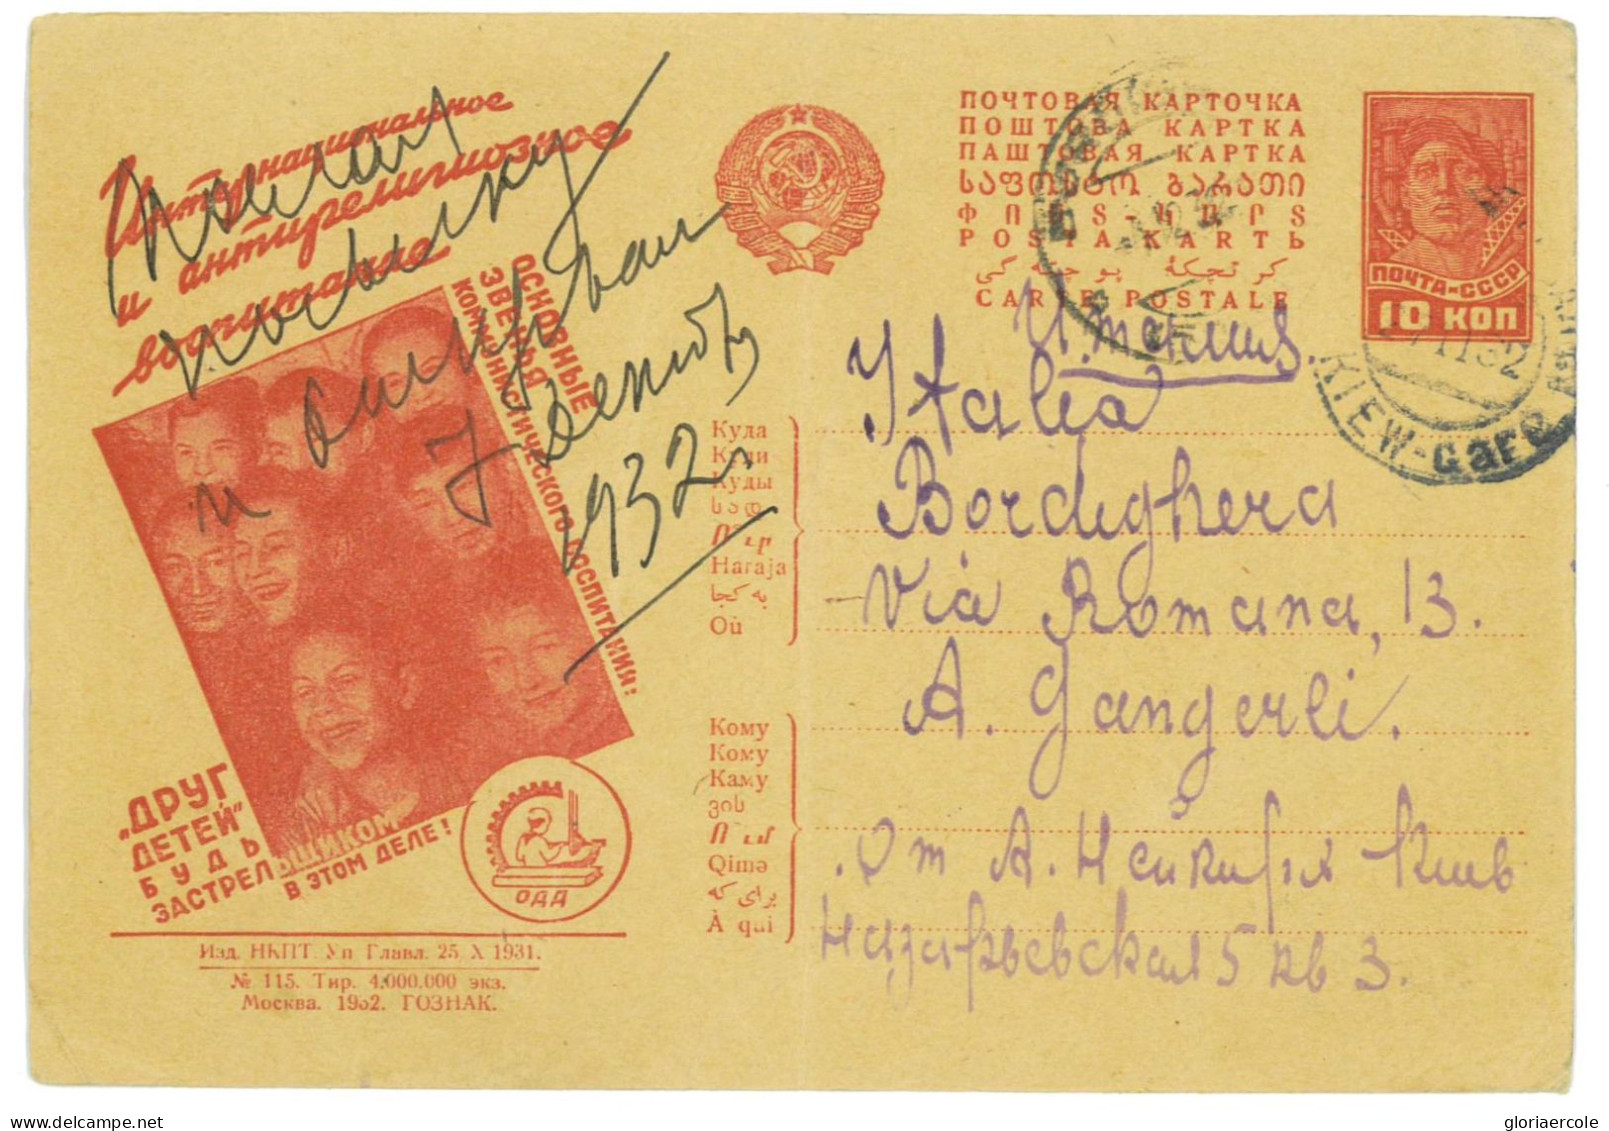 P2920 - RUSSIA , STATIONERY POST CARD MICHEL P127 /115 USED TO ITALY, 1932 - Lettres & Documents